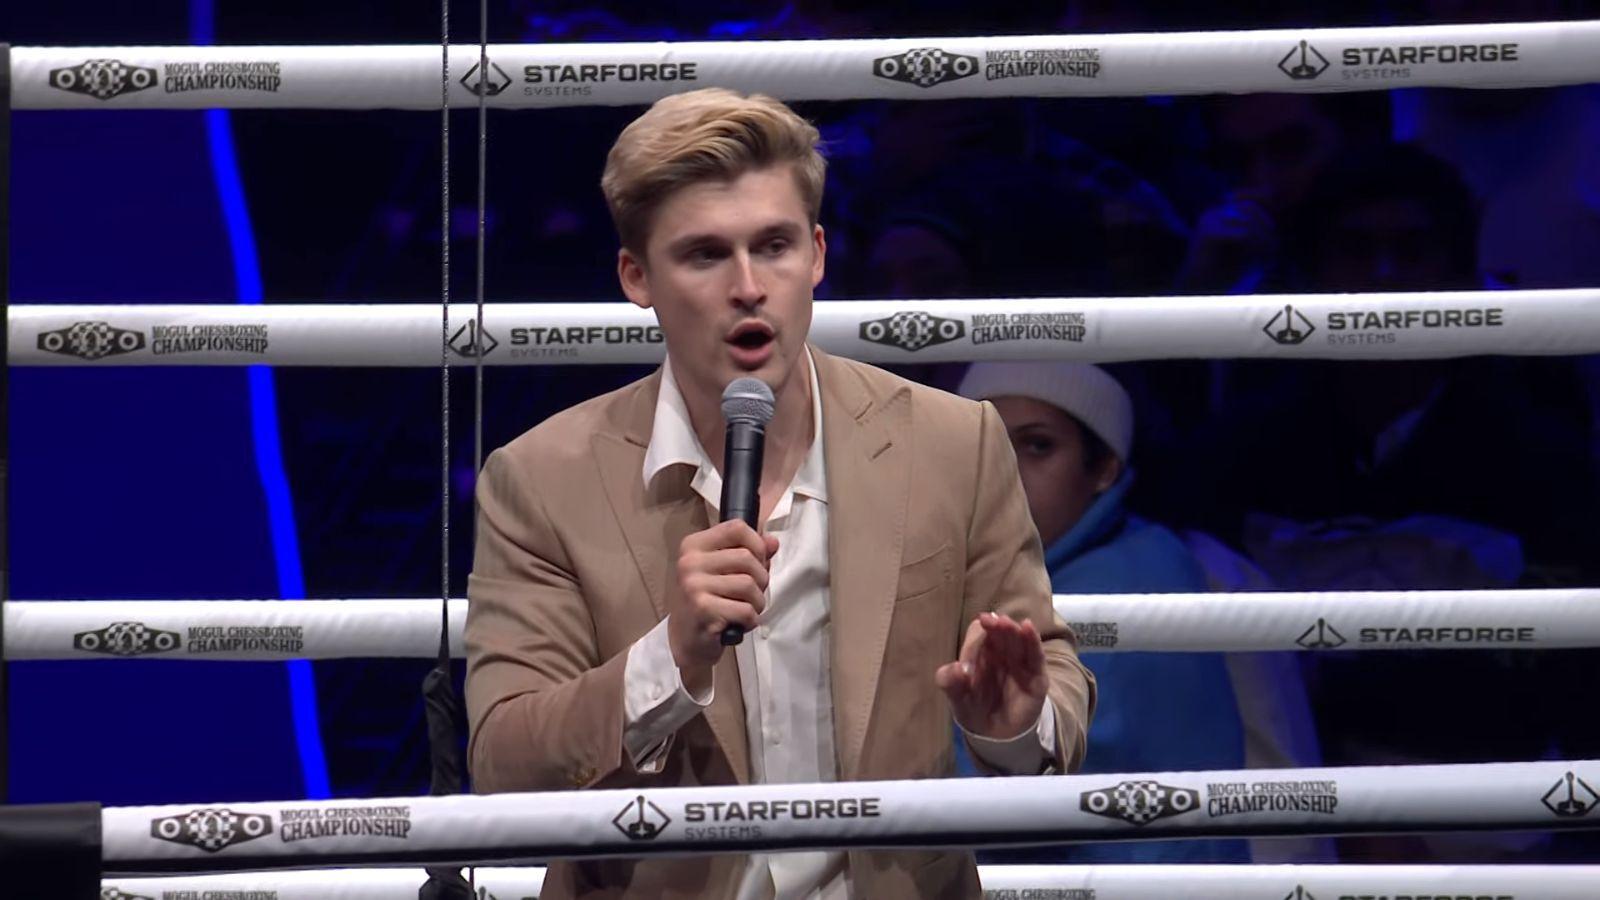 Ludwig leaks jaw-dropping cost of Mogul Chessboxing Championship